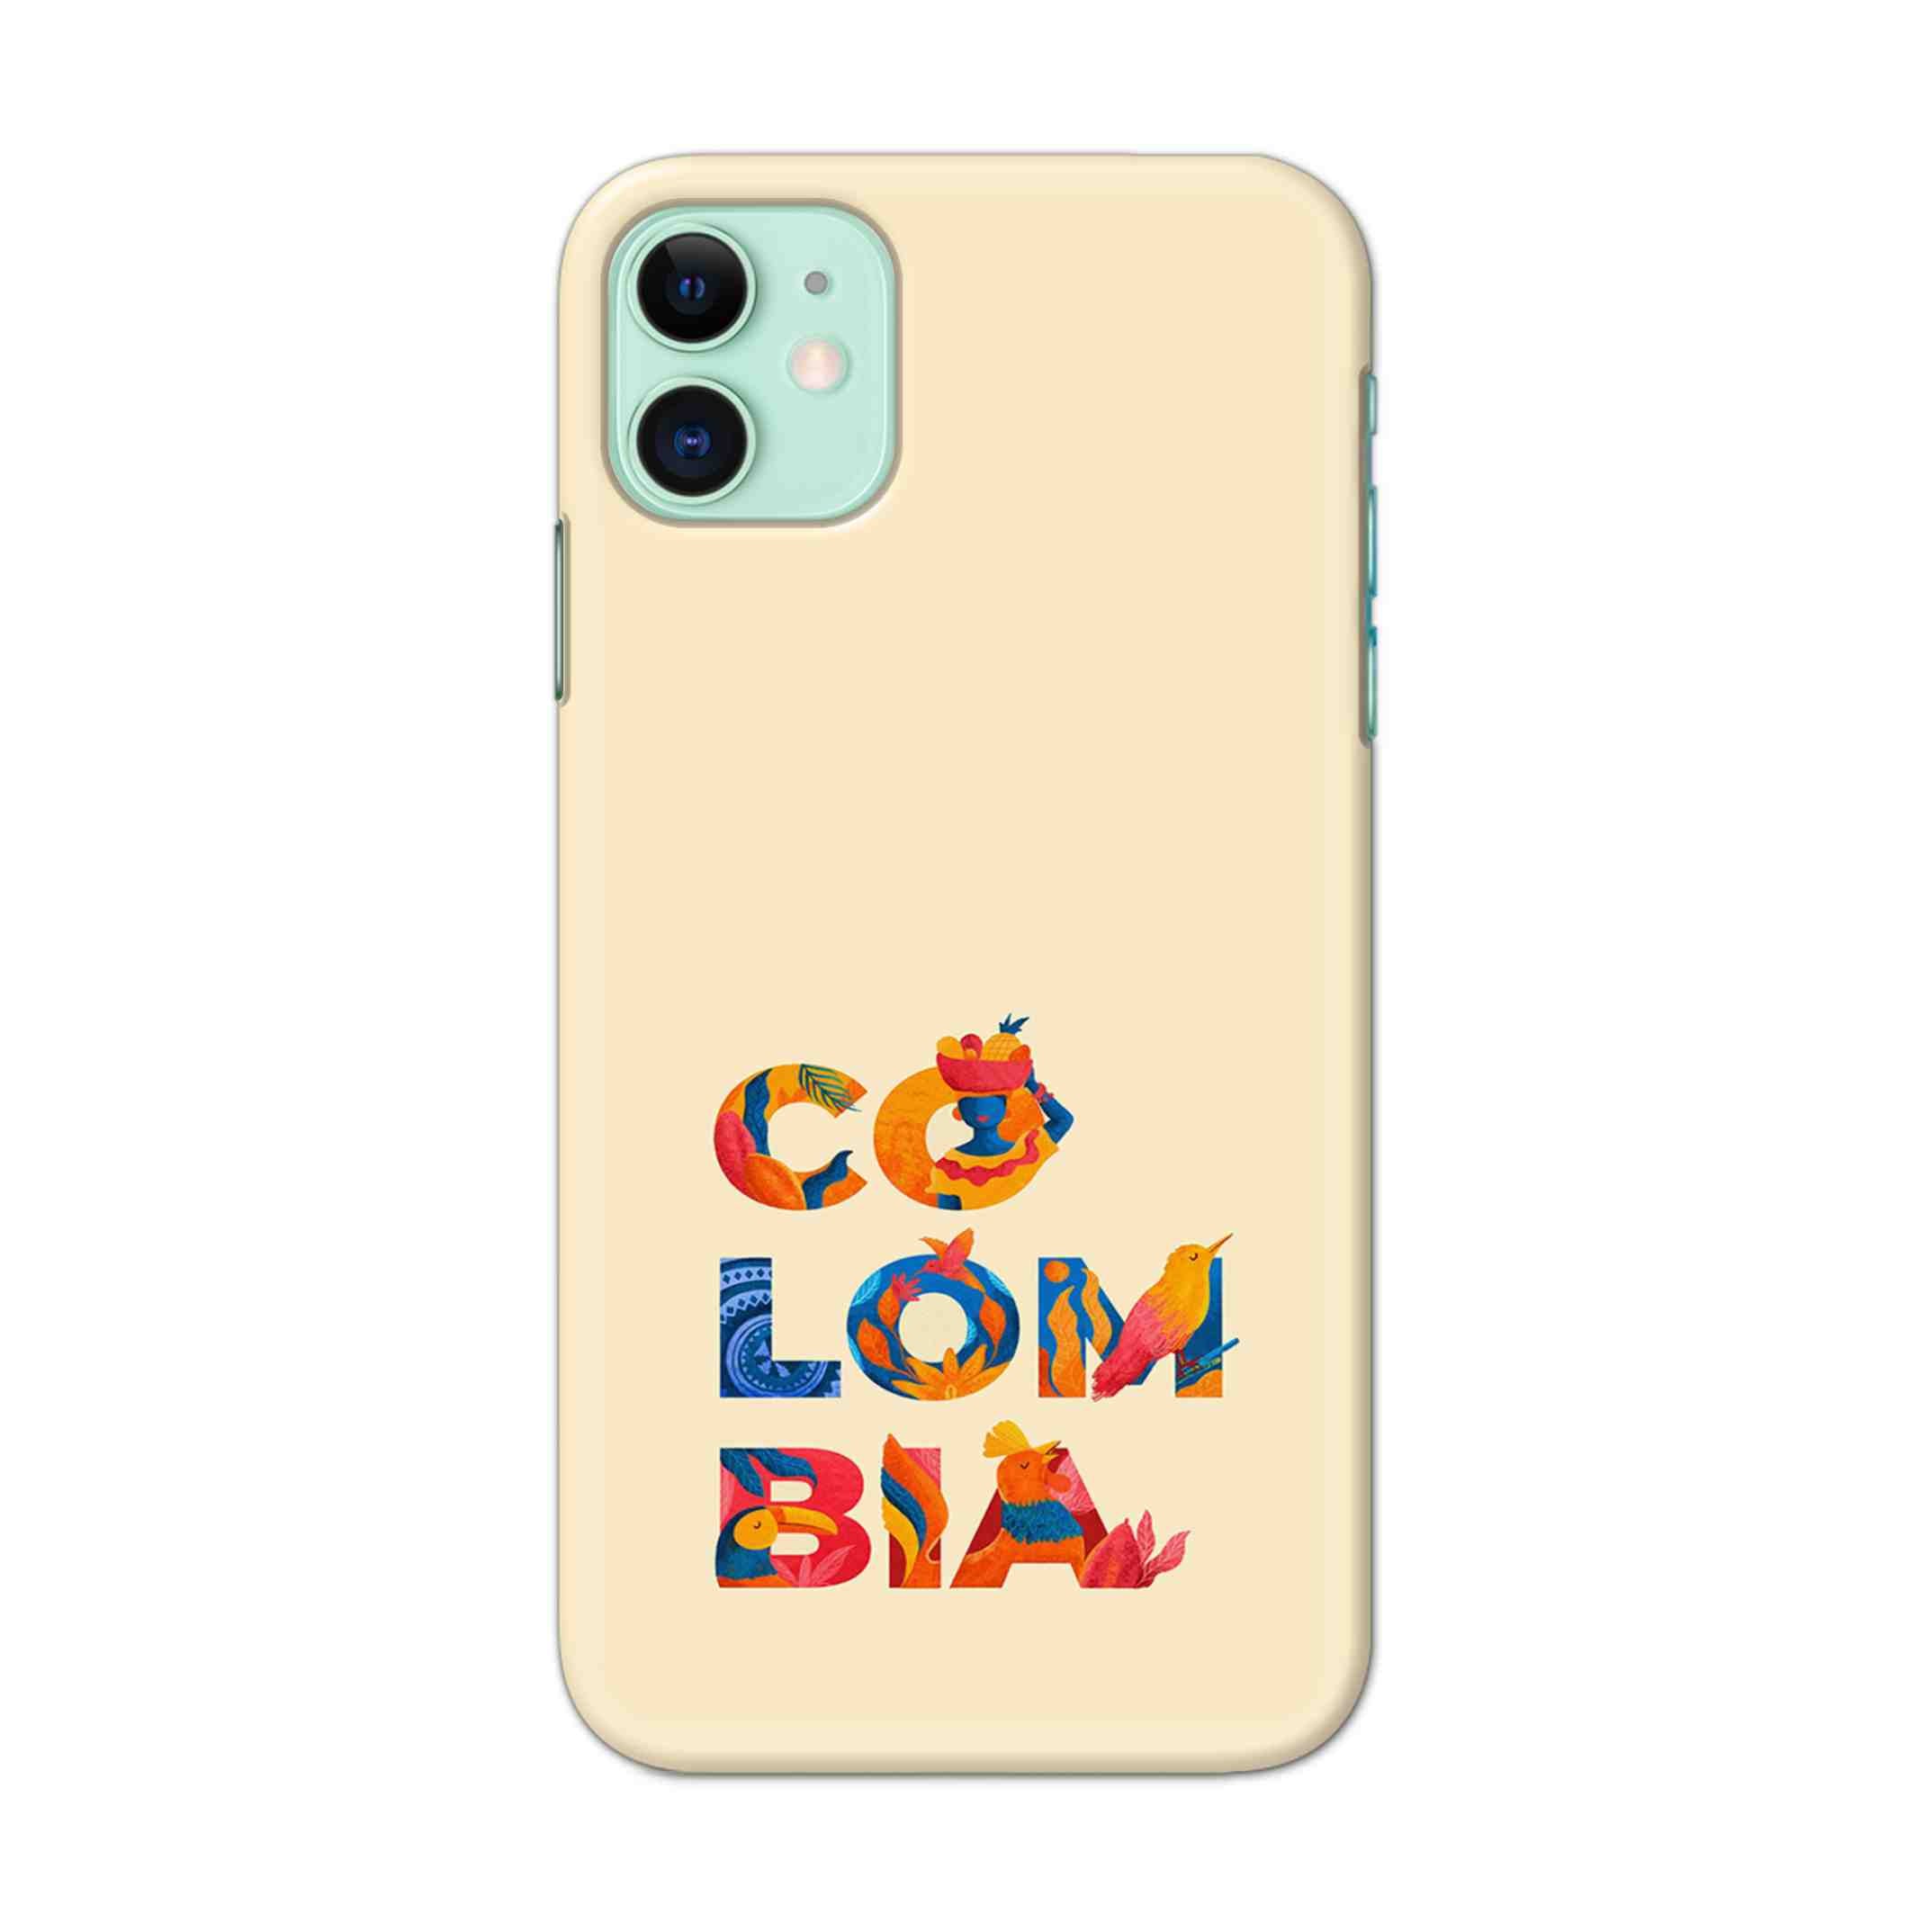 Buy Colombia Hard Back Mobile Phone Case/Cover For iPhone 11 Online